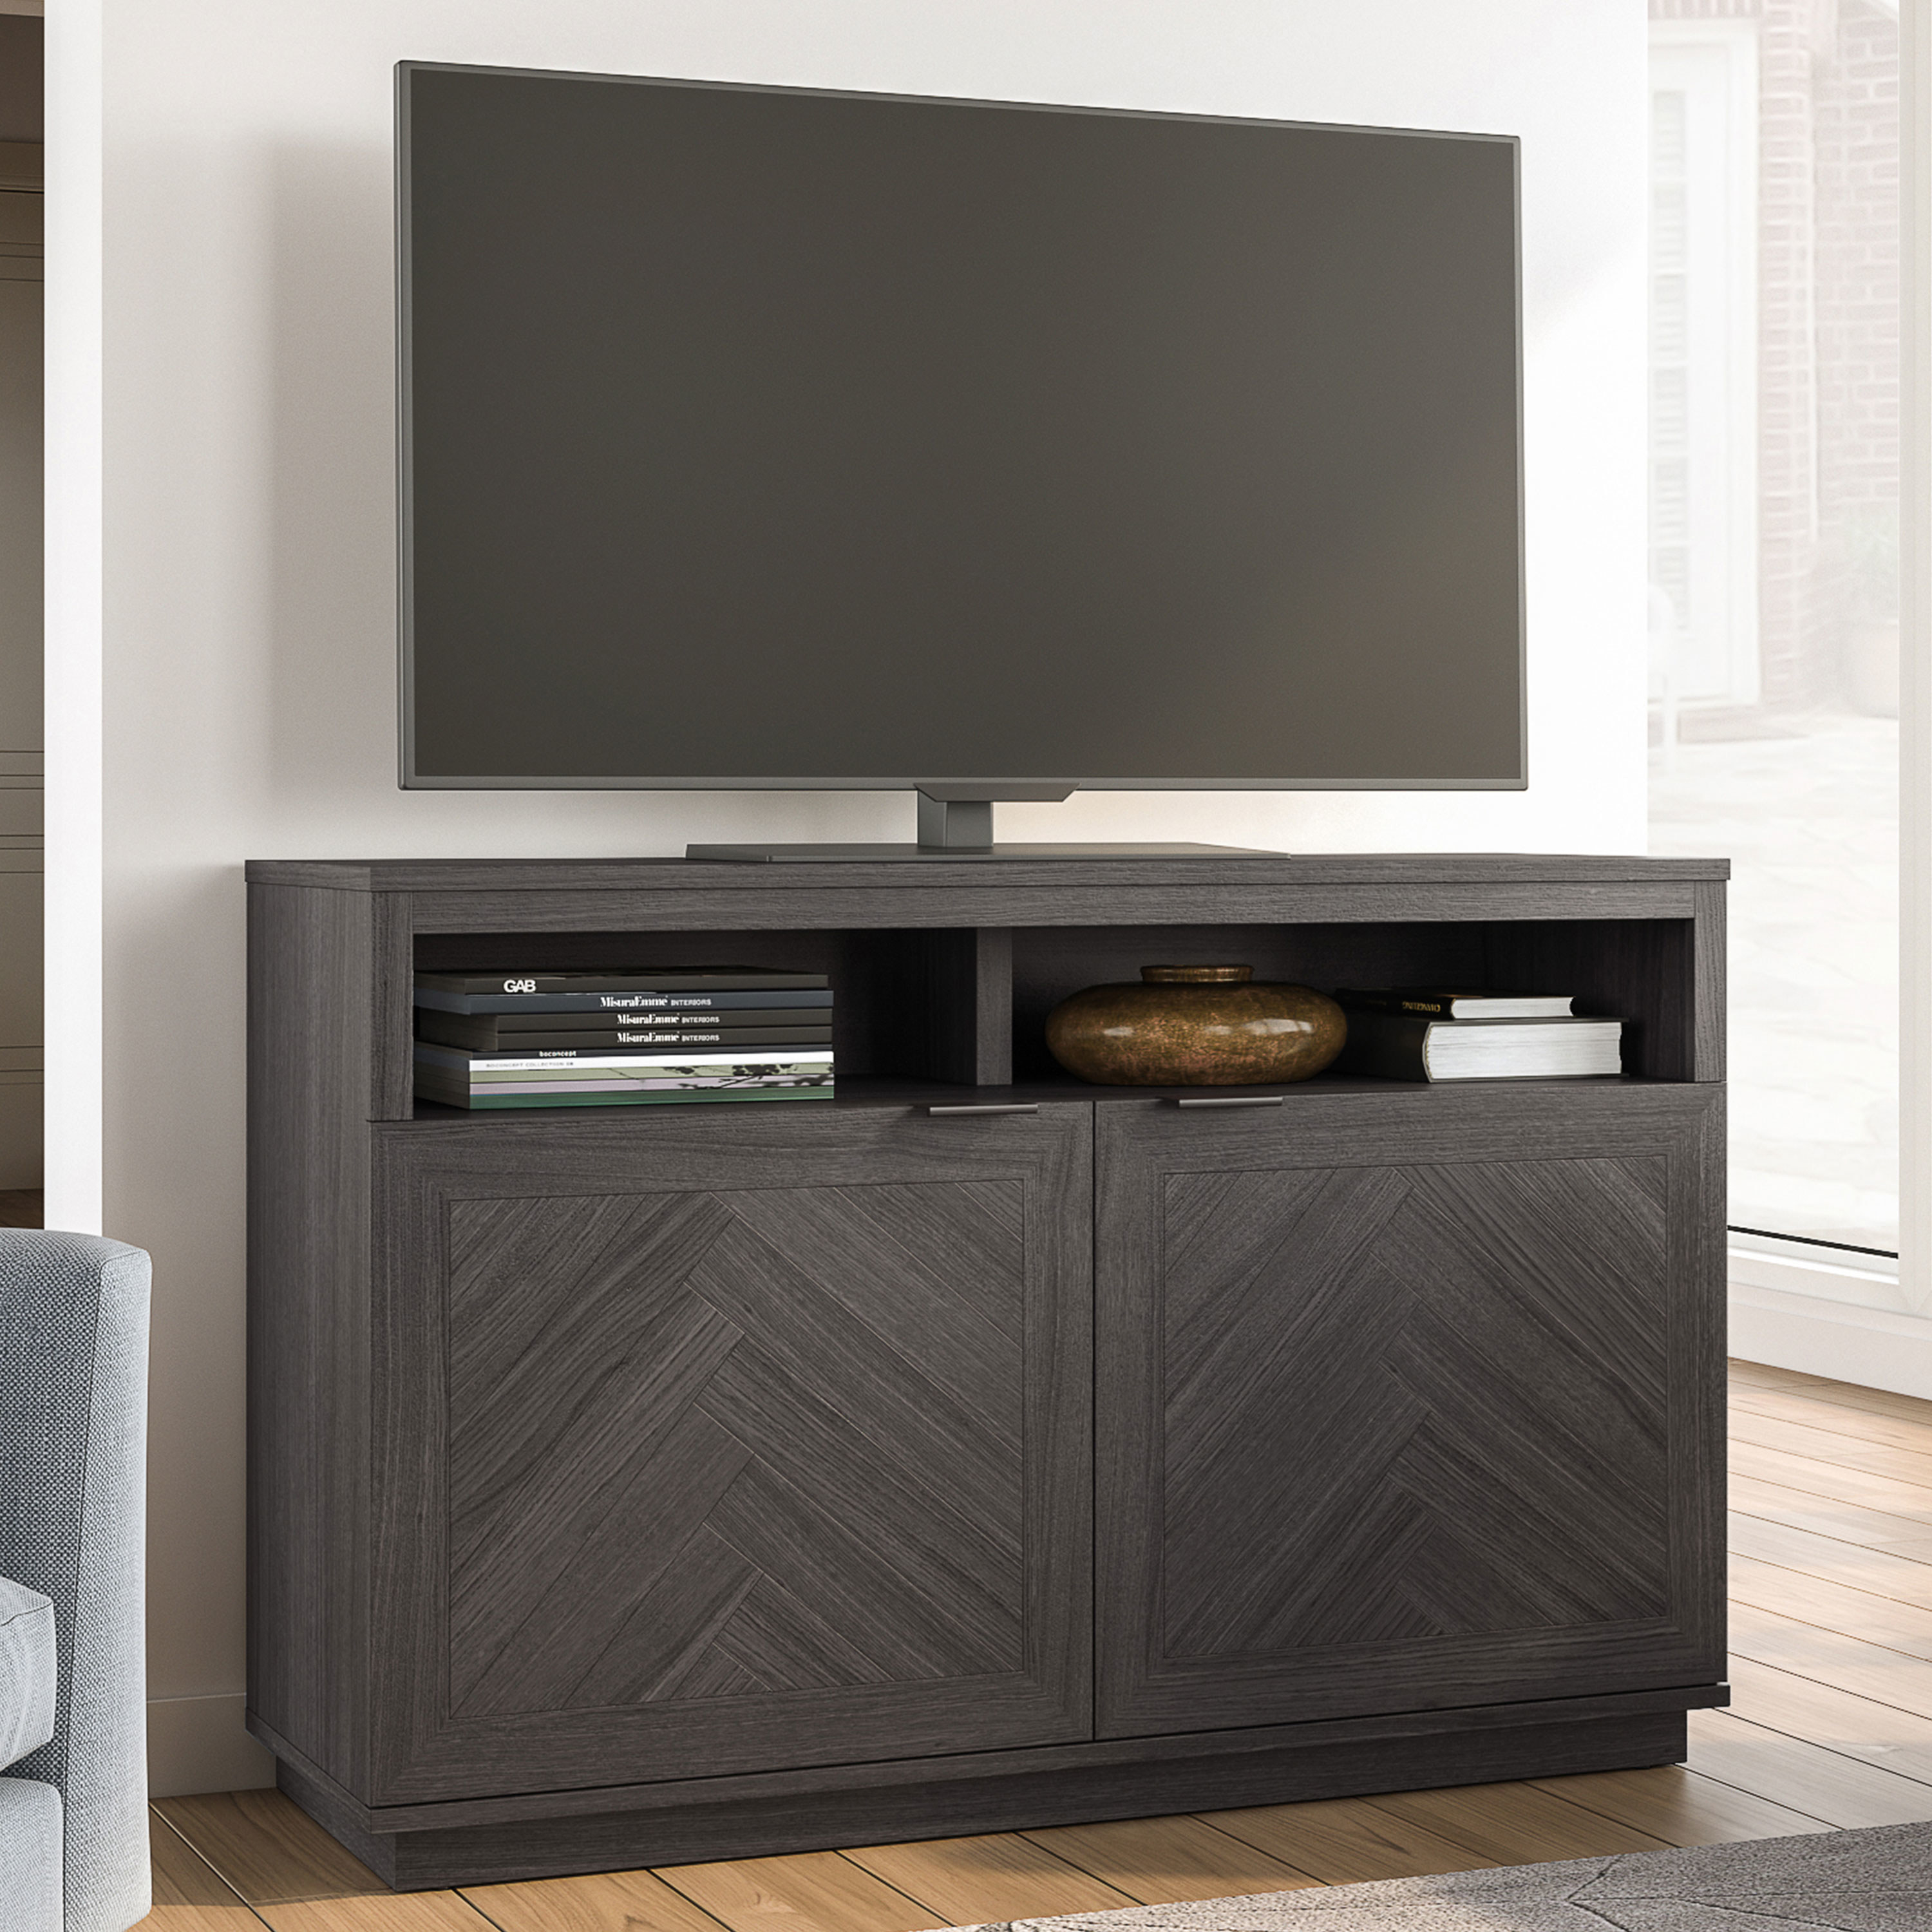 the grey TV stand